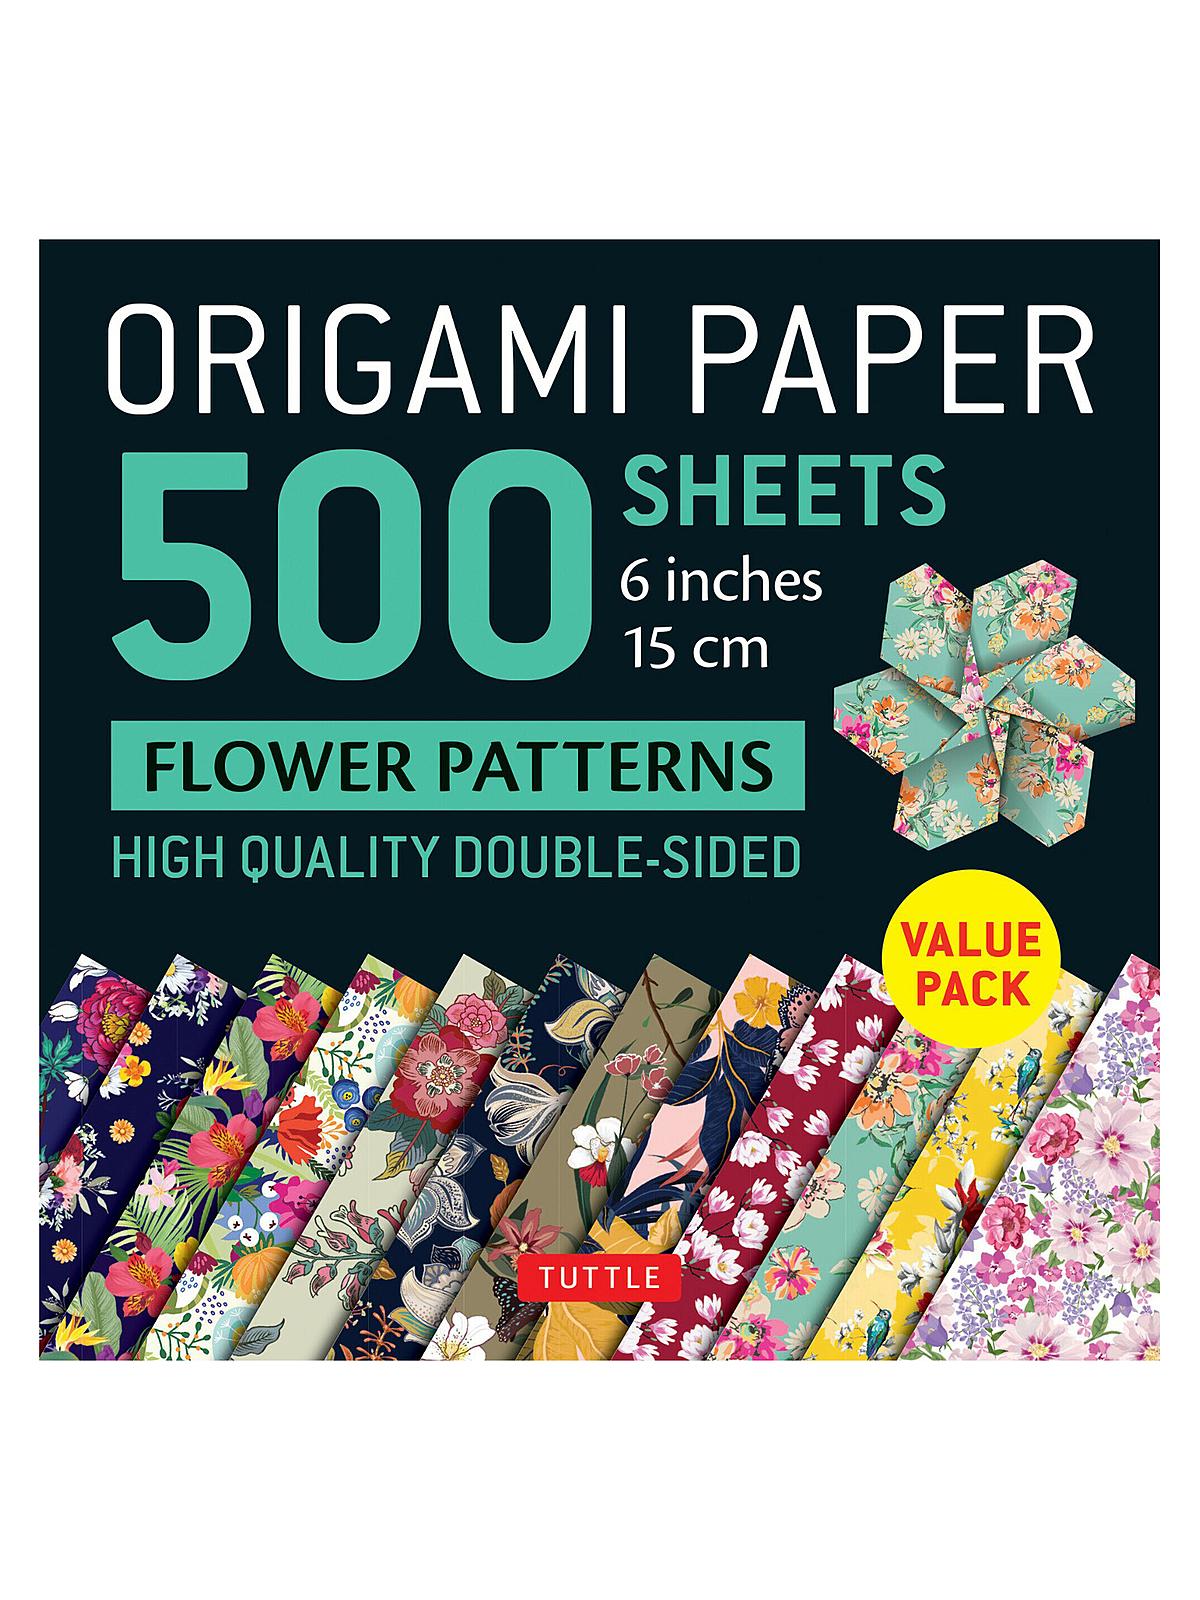 Origami Paper Flower Patterns 6 X 6 200 Sheets